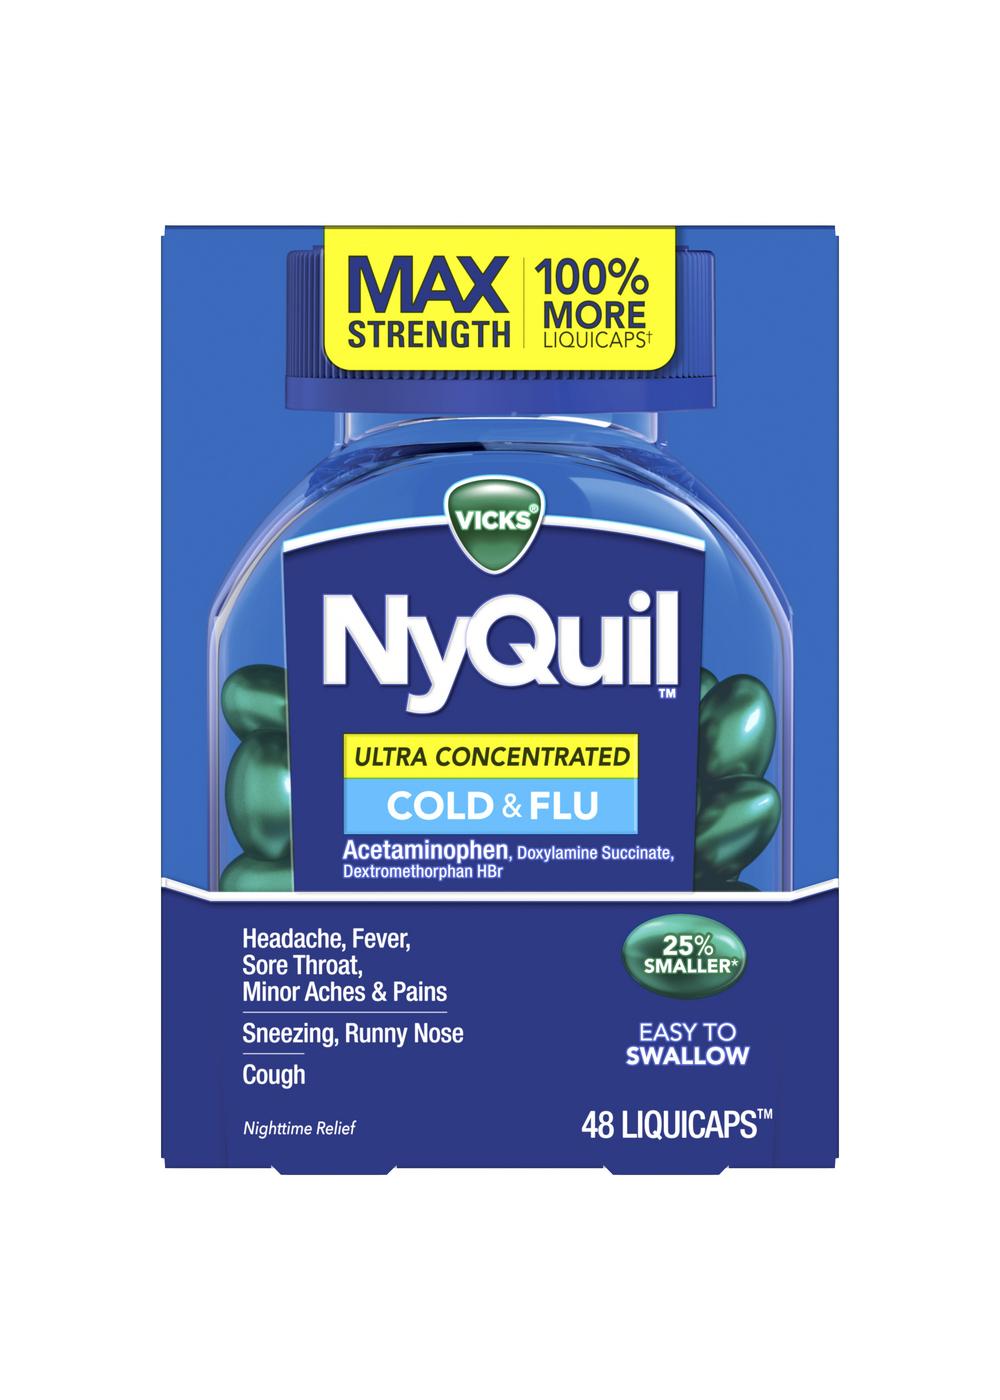 Vicks NyQuil Cold &Flu Liquicaps; image 1 of 6